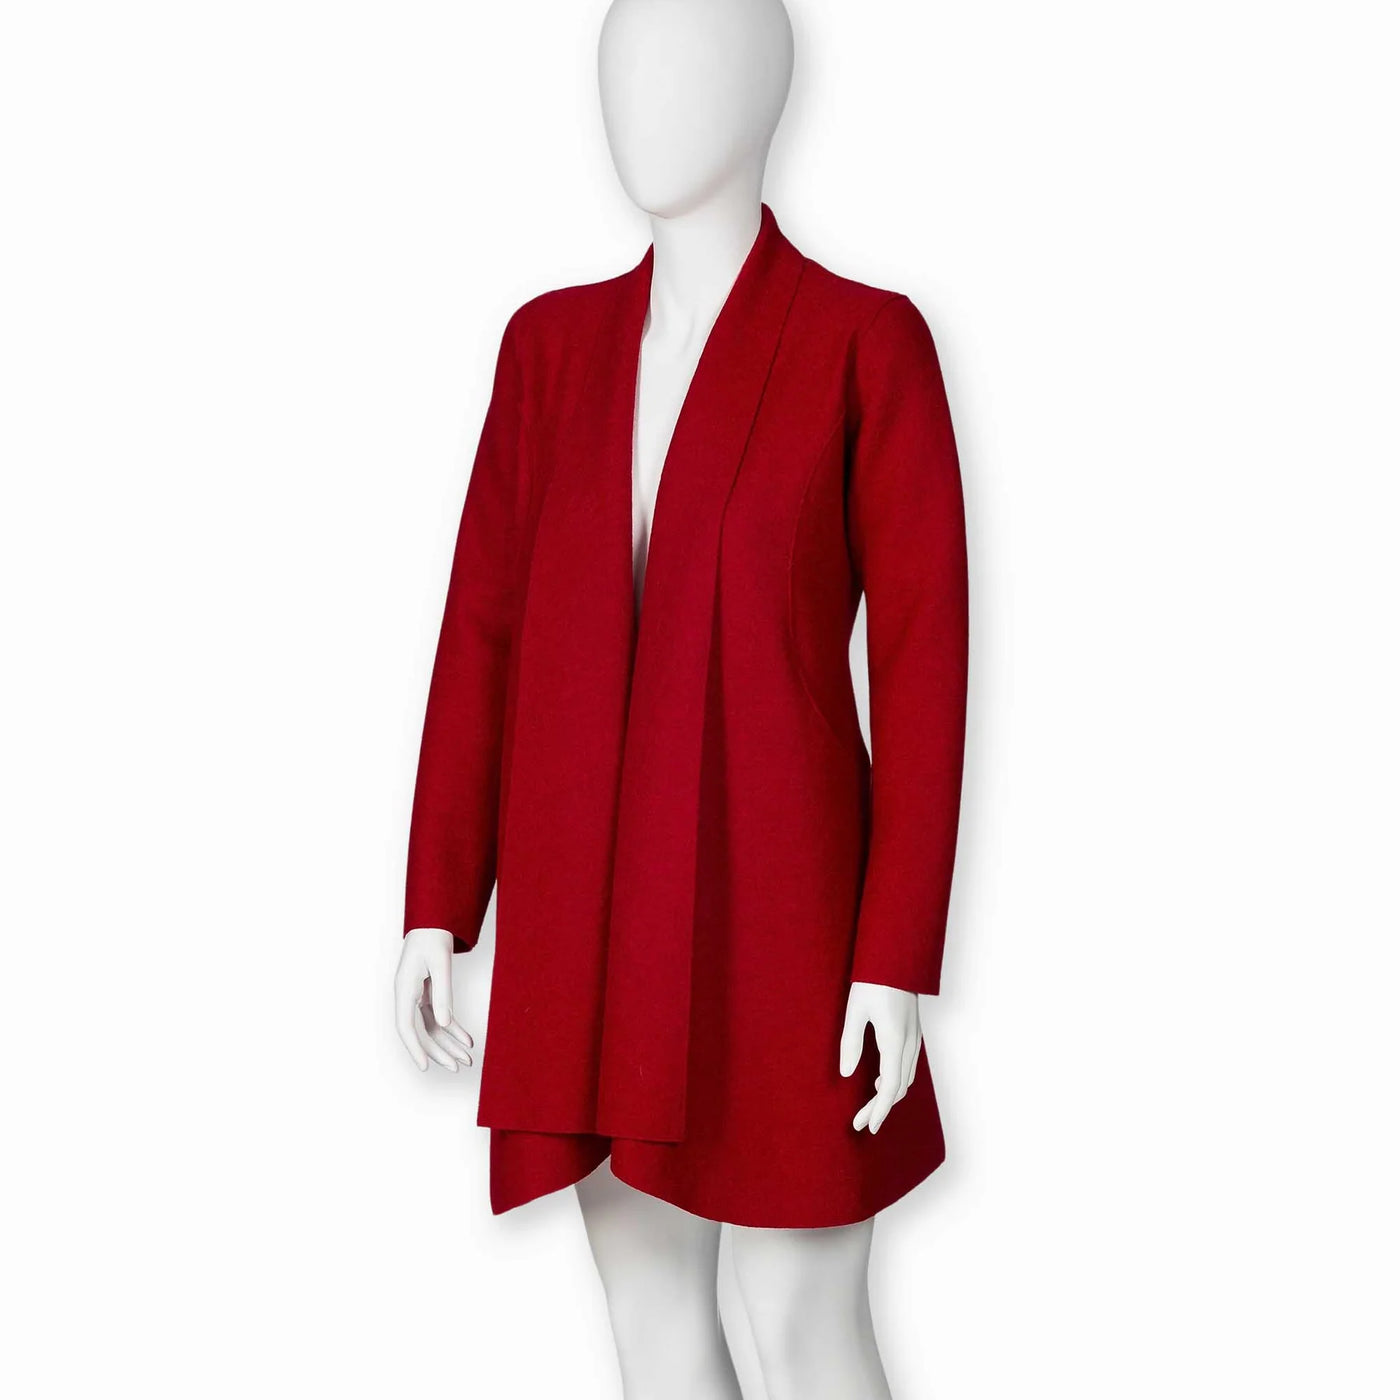 ALICIA ADAMS SWING COAT (Available in Sizes and Colors)